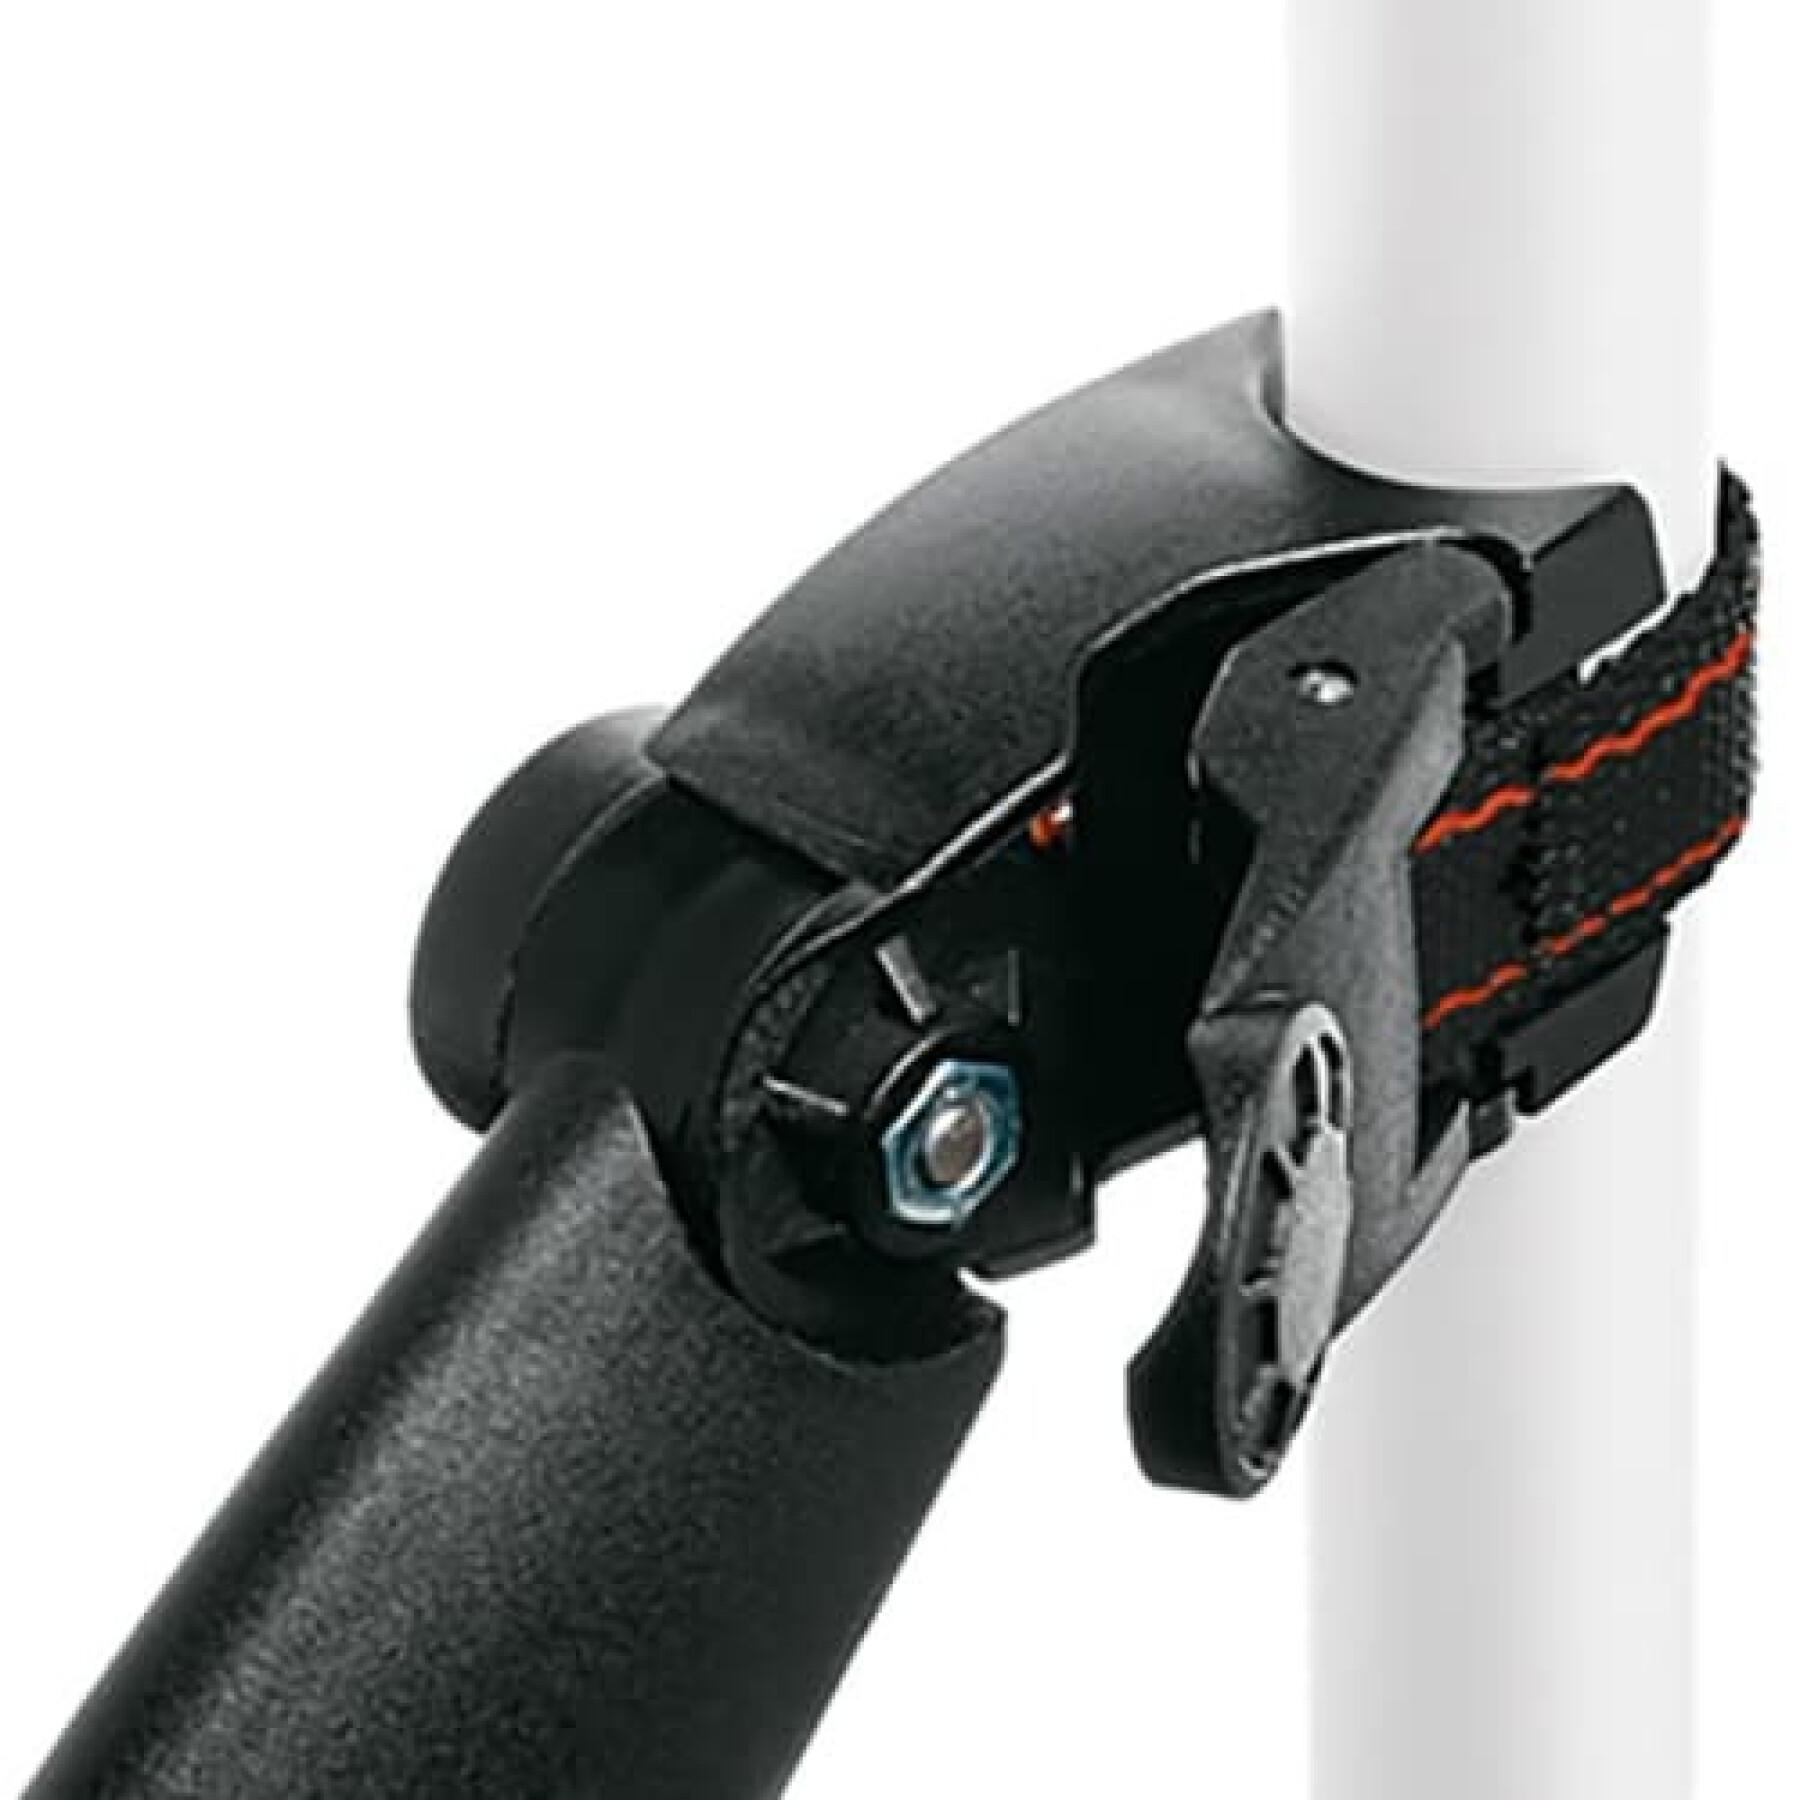 Mudguard at the seatpost SKS x-tra dry 26